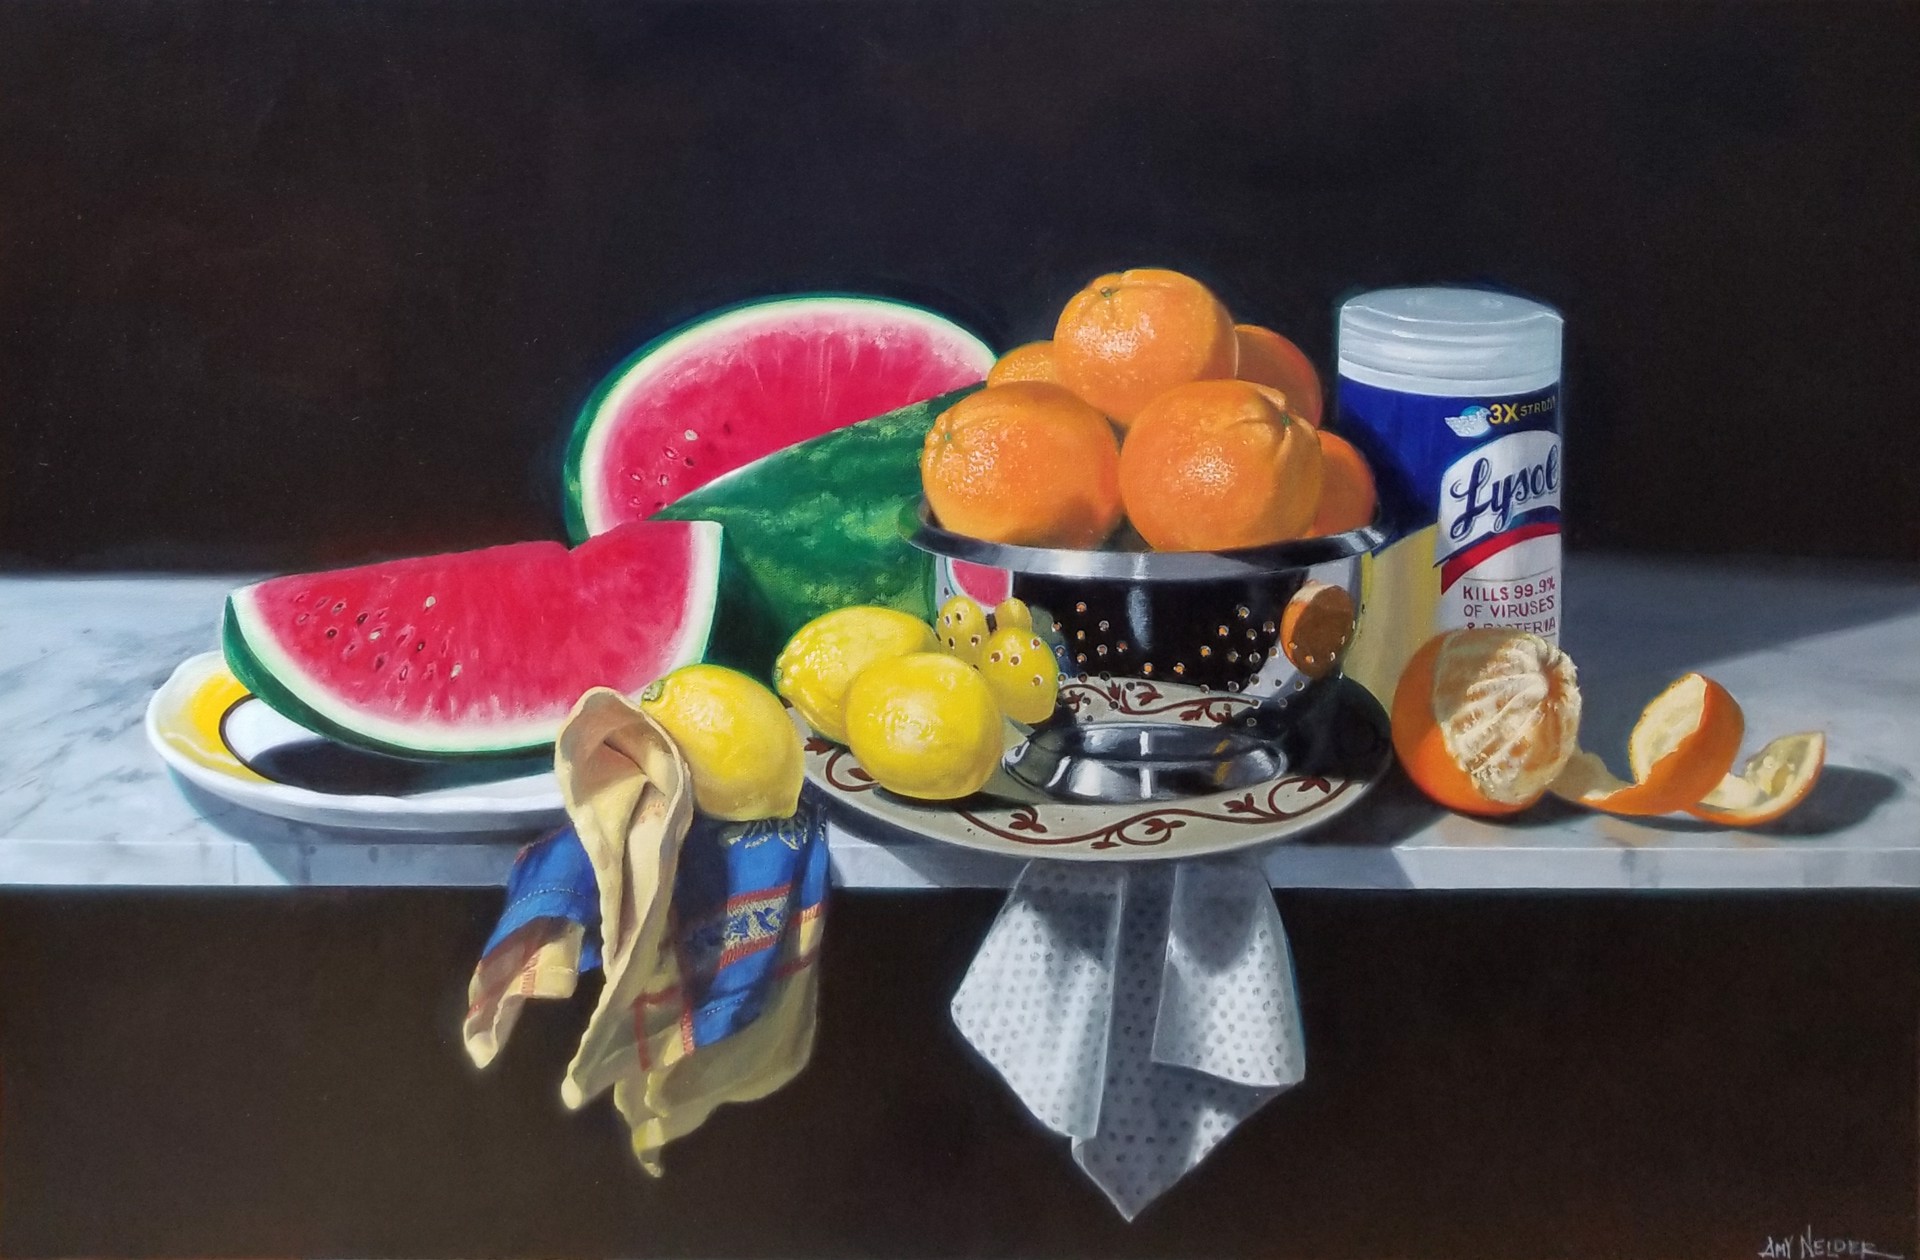 Disinfecting station (Traditional still life with watermelon, citrus and Lysol), Spring 2020 by Amy Nelder